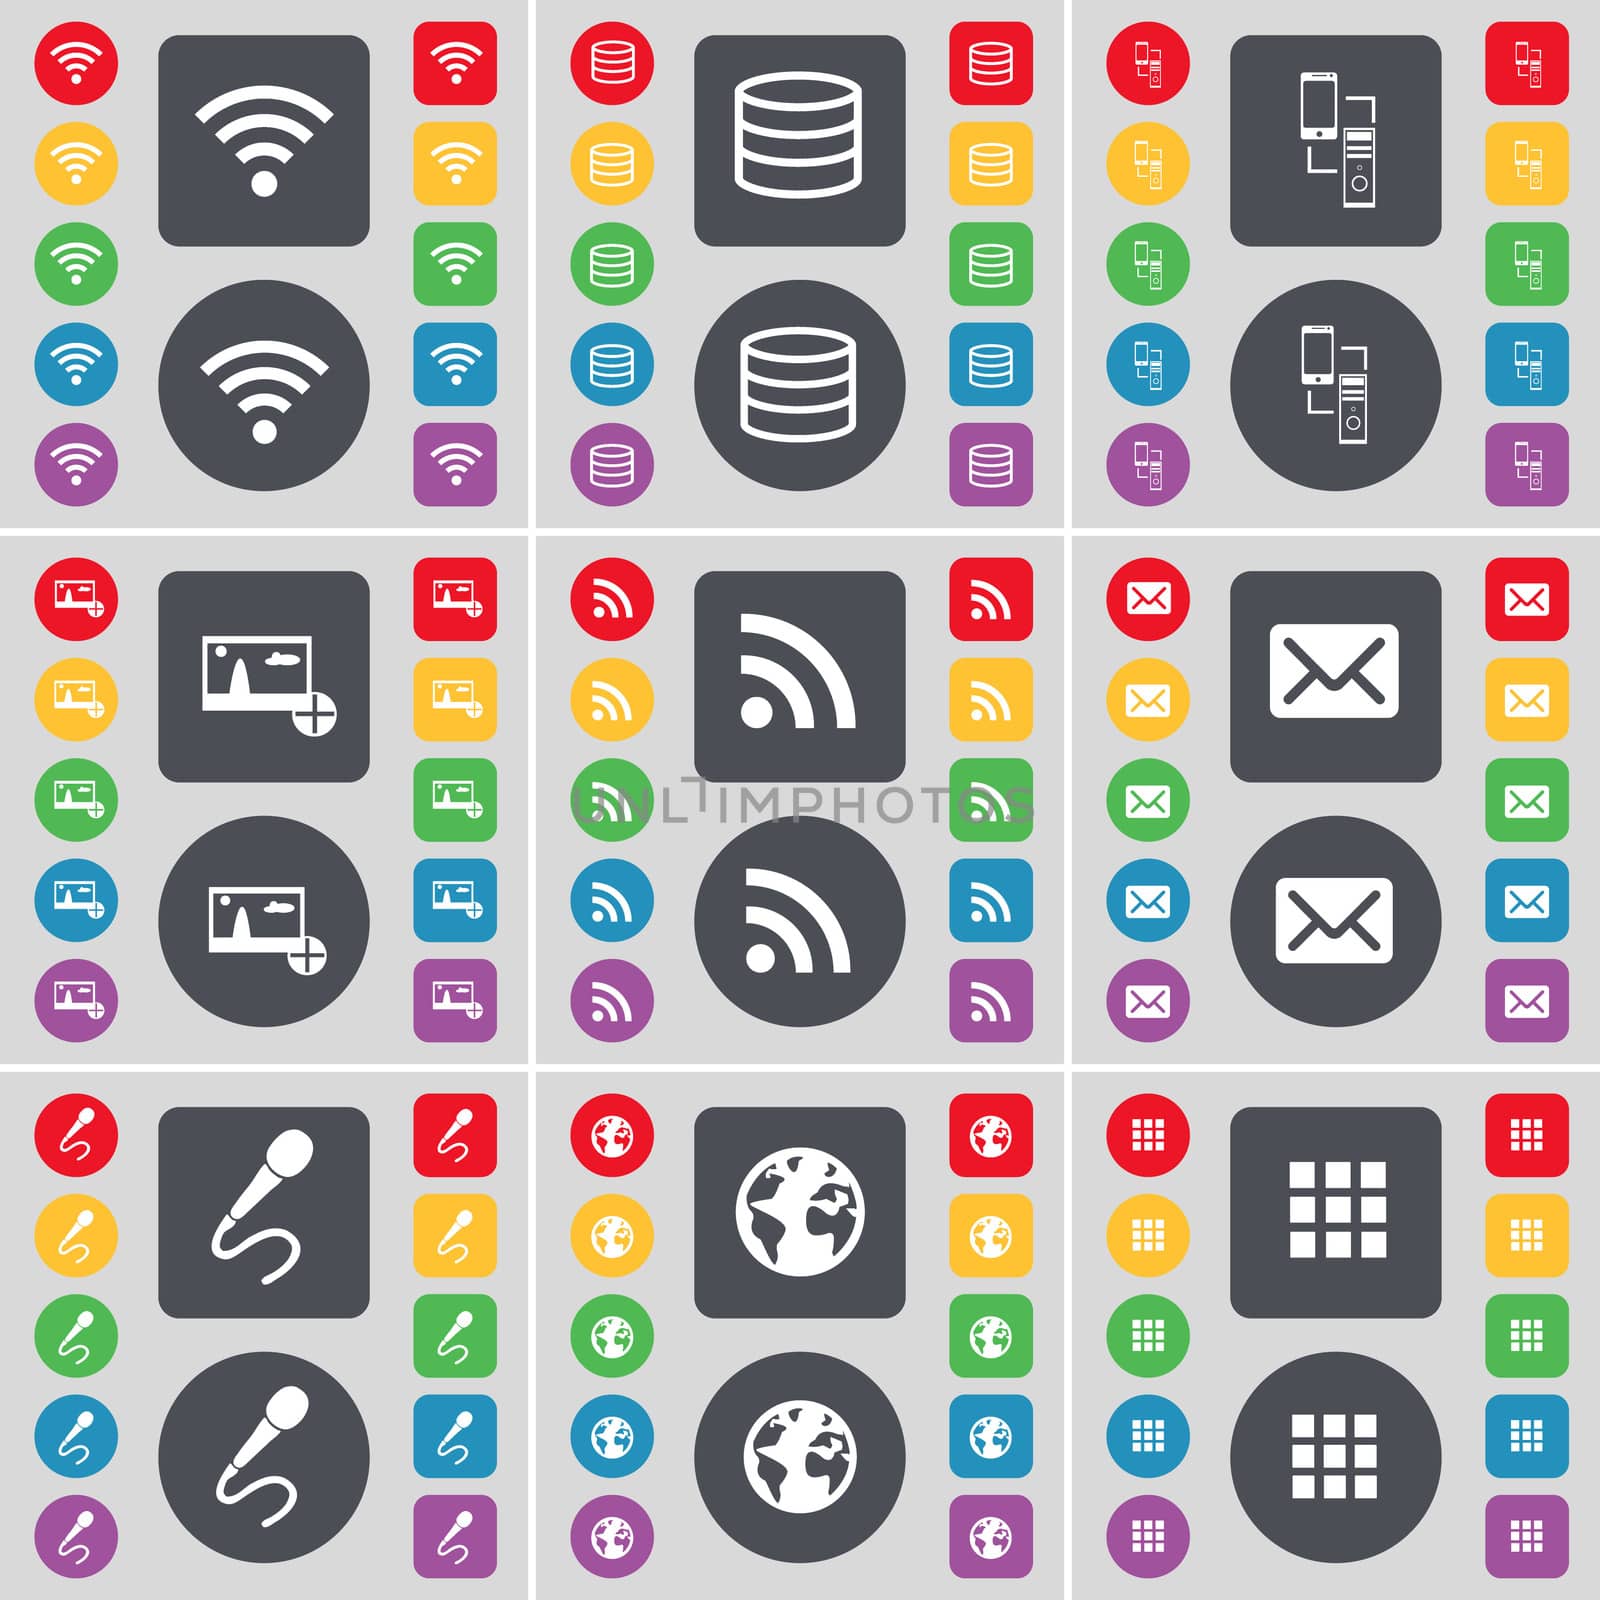 Wi-Fi, Database, Connection, Picture, RSS, Message, Microphone, Earth, Apps icon symbol. A large set of flat, colored buttons for your design. illustration